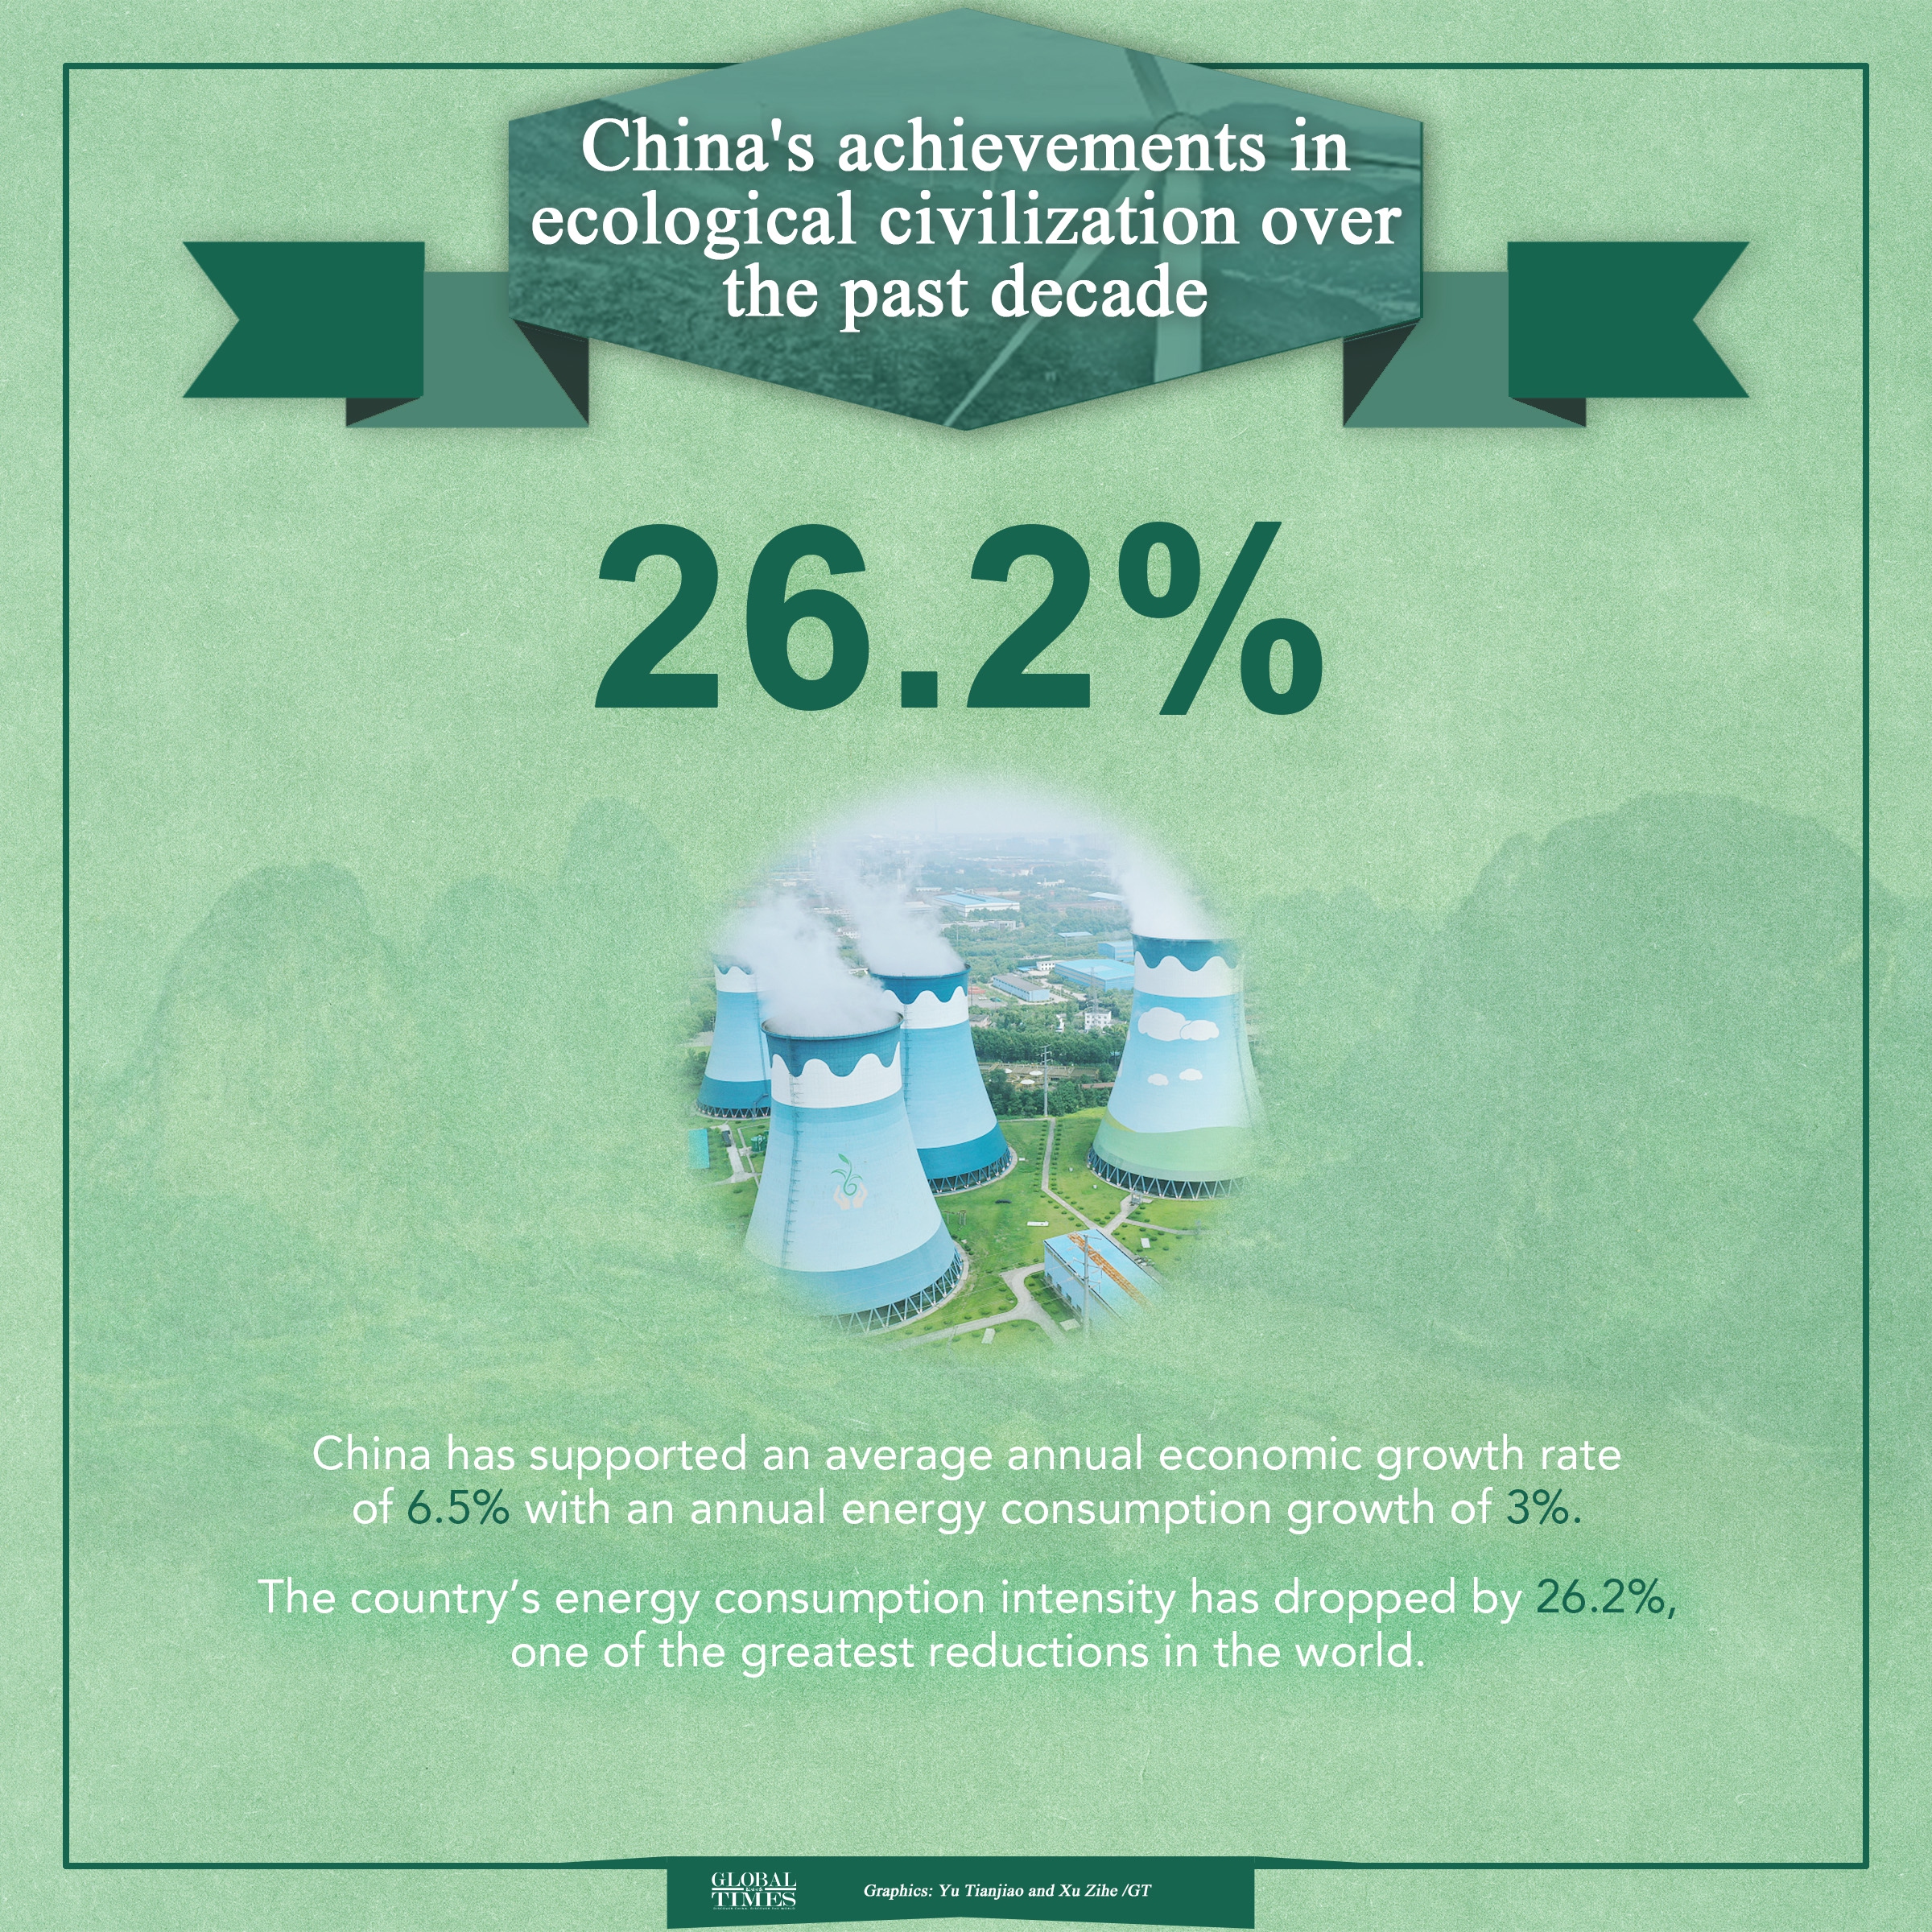 China's achievements in ecological civilization over the past decade